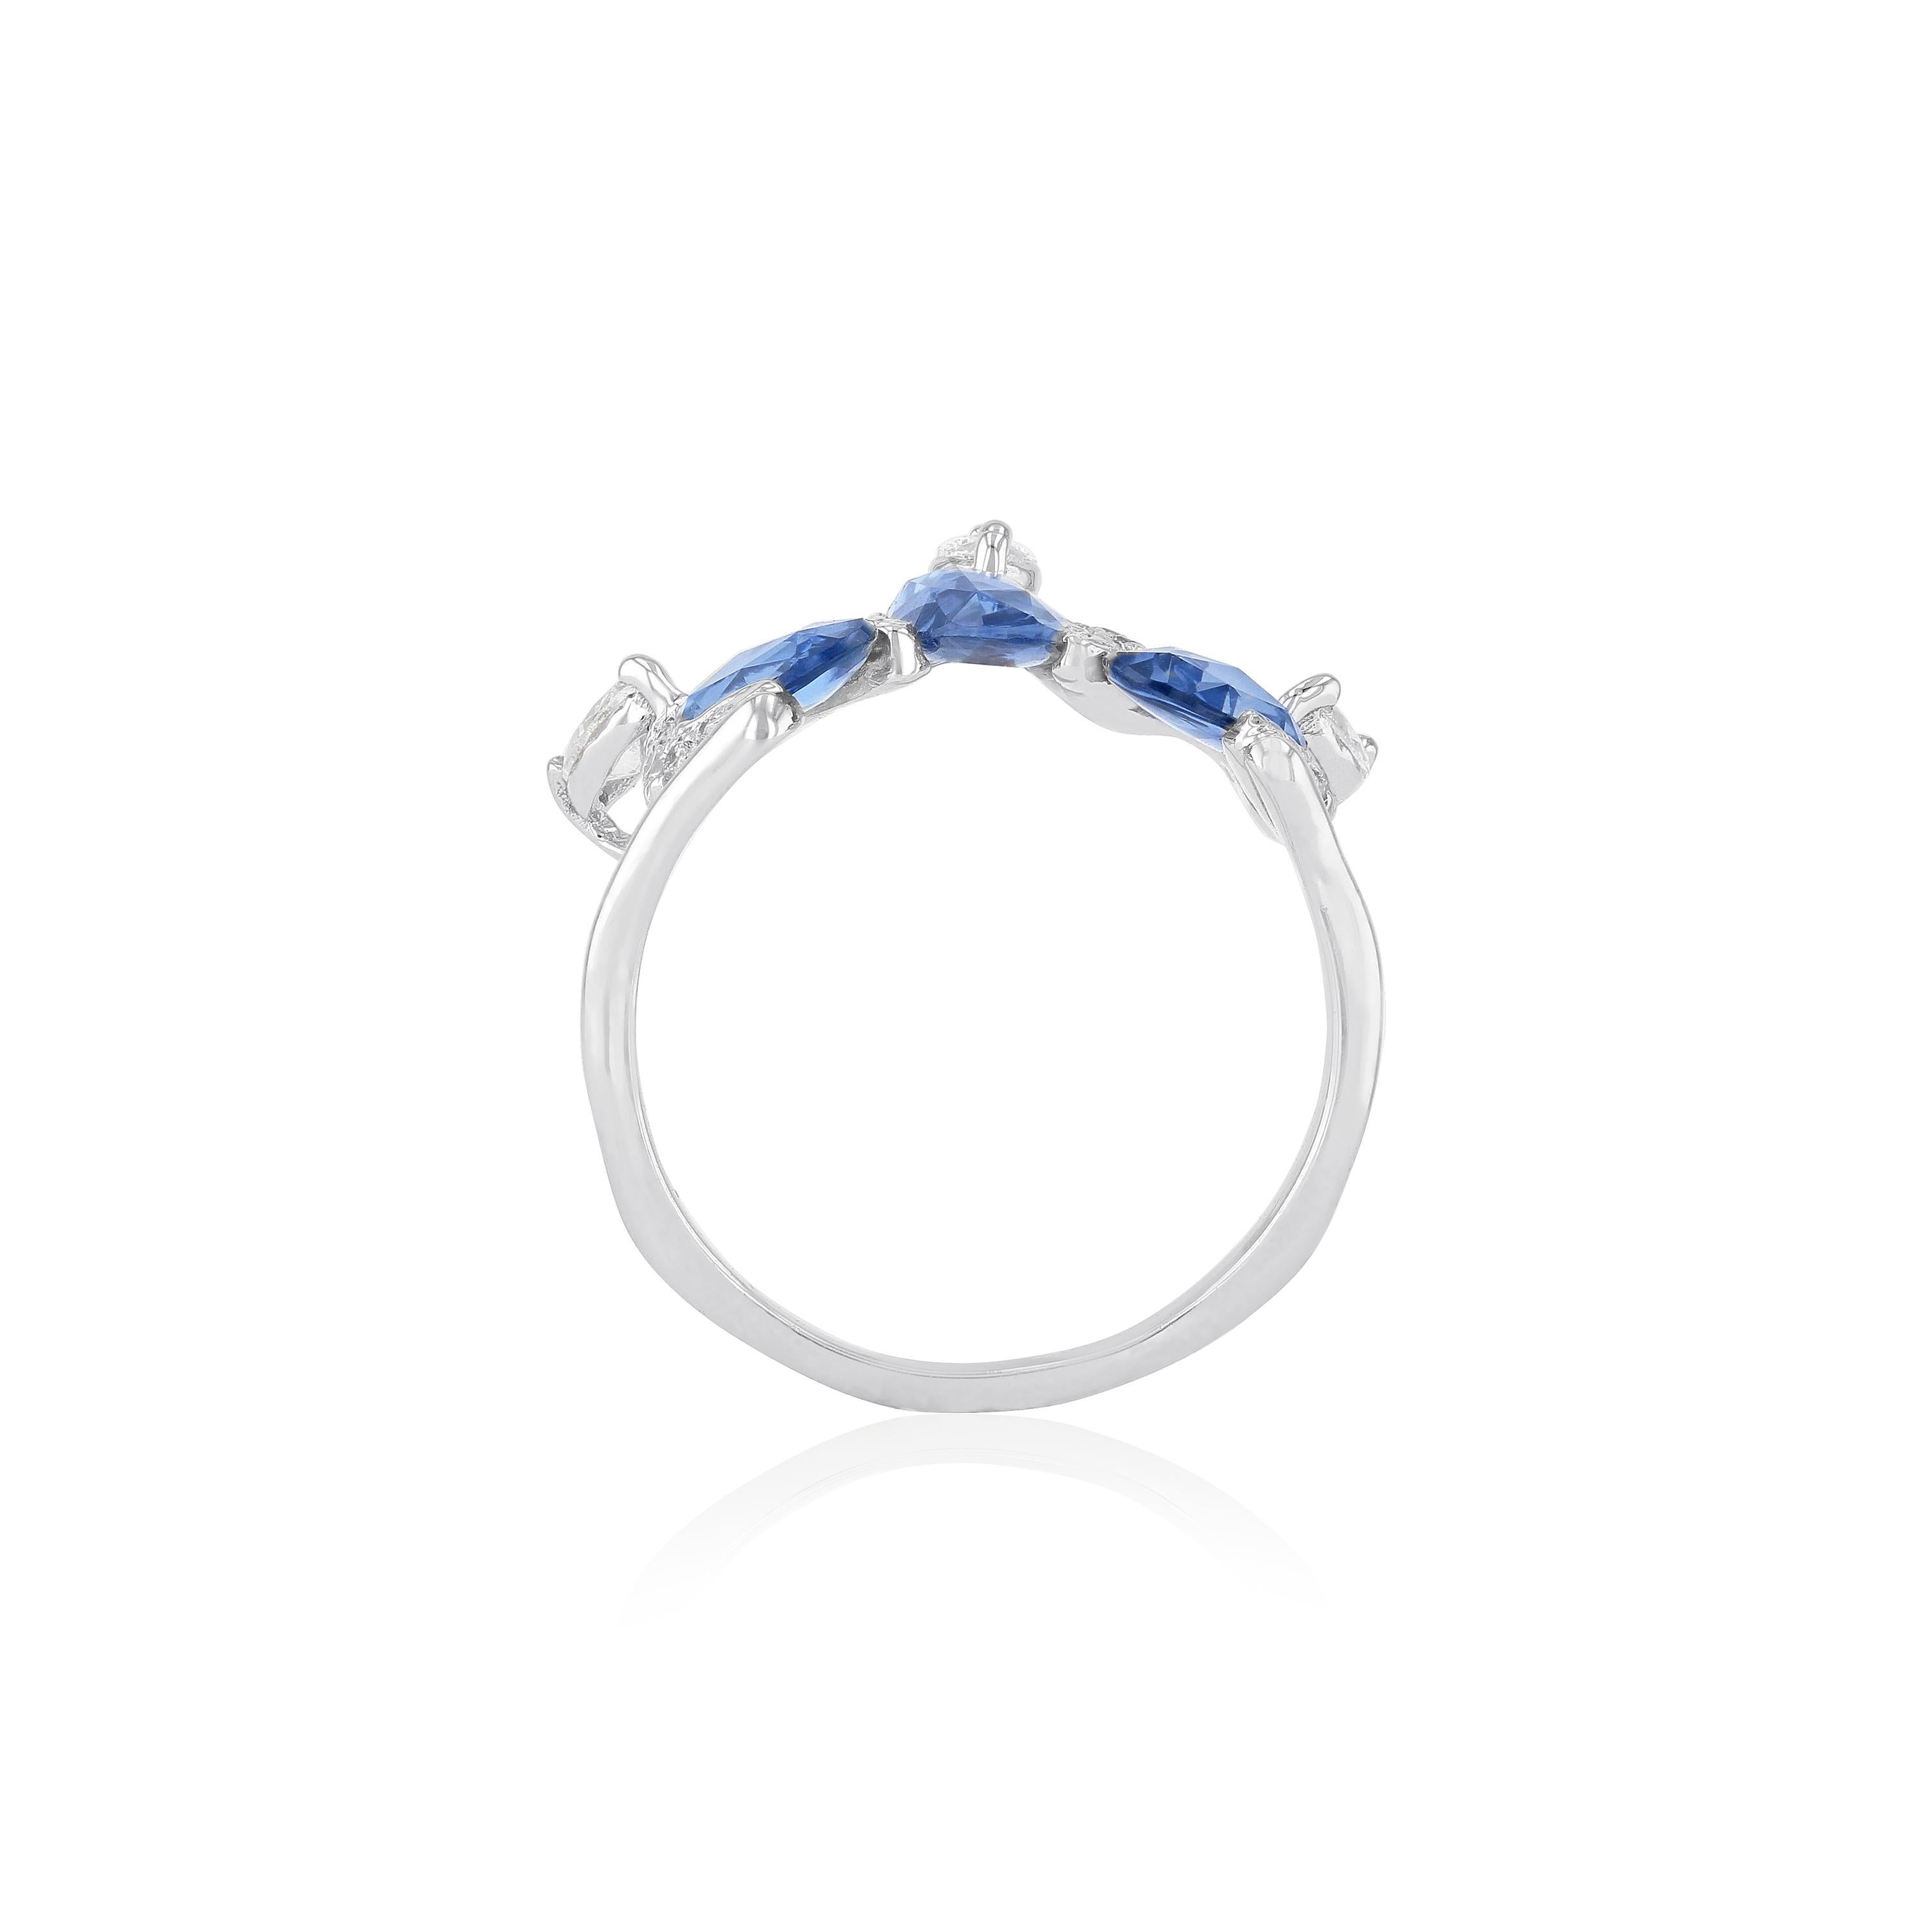 This iconic ring is inspired from the Islamic architecture and Arabesque designs. It features 3 drops of blue sapphires addorned with 3 marquise diamonds on the top. The perfect mix for edgy and feminine.
Diamonds (Total Carat Weight:2.05 ct) 
Blue